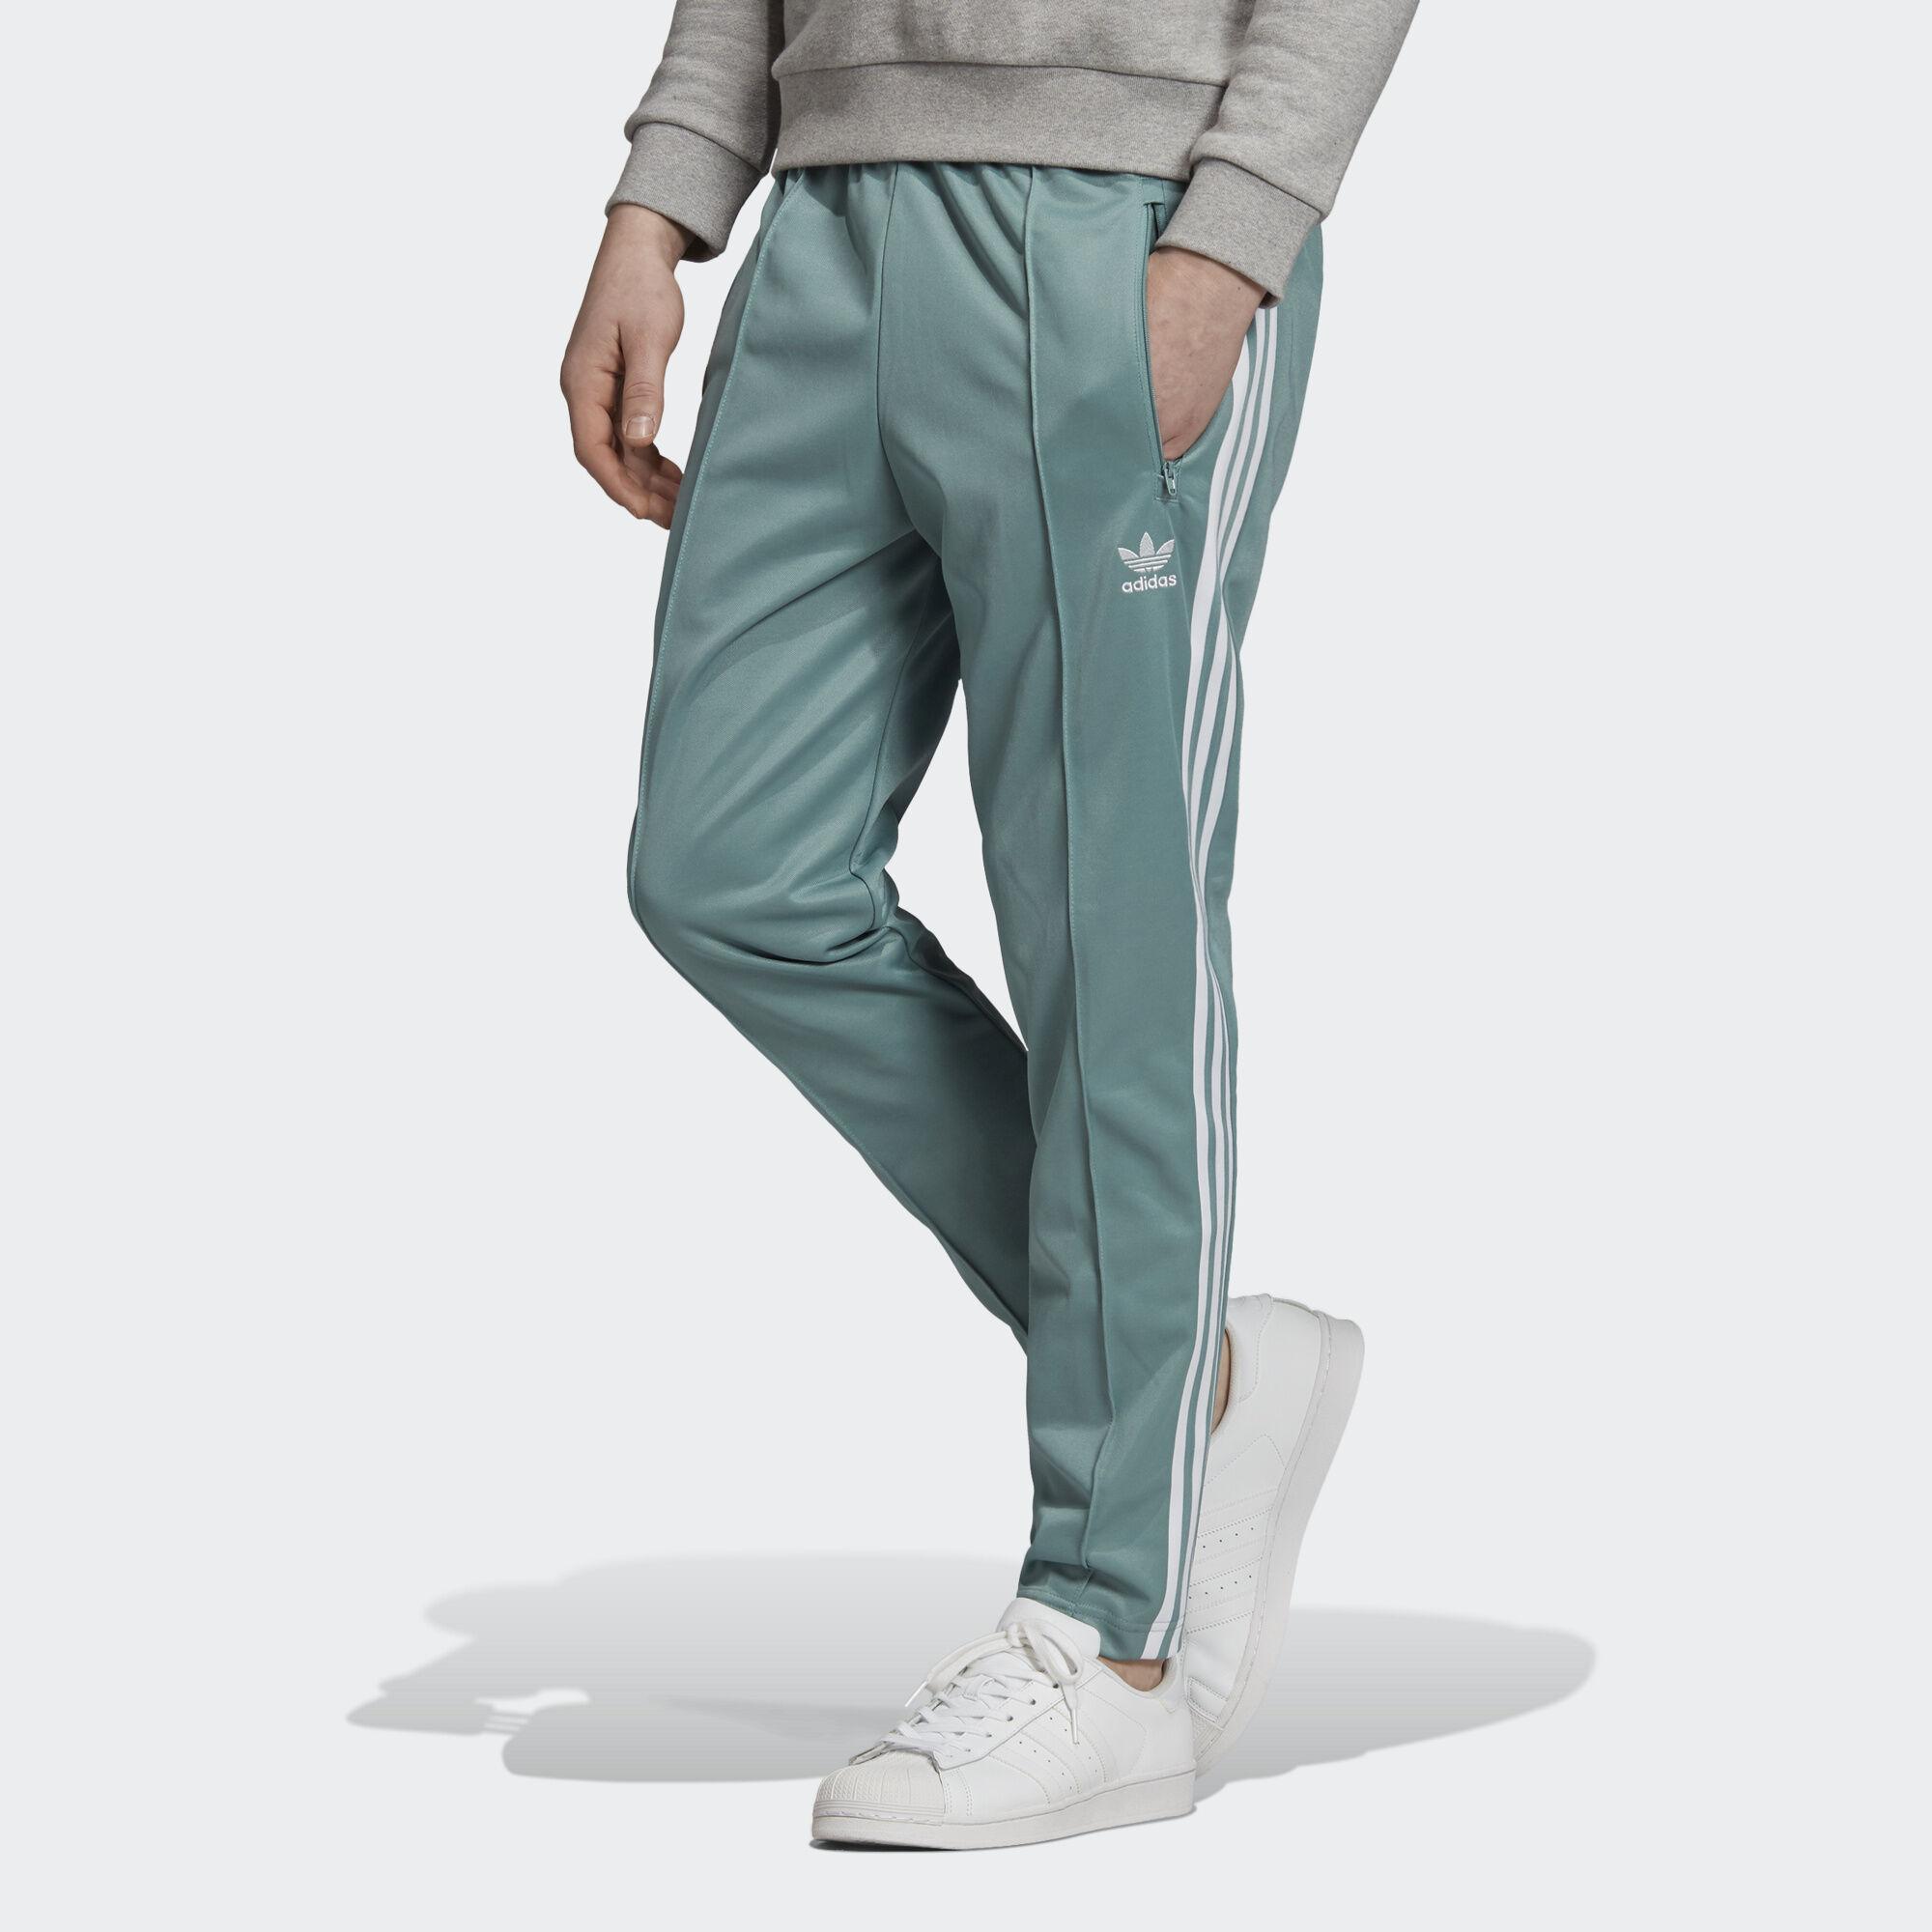 bb tracksuit bottoms